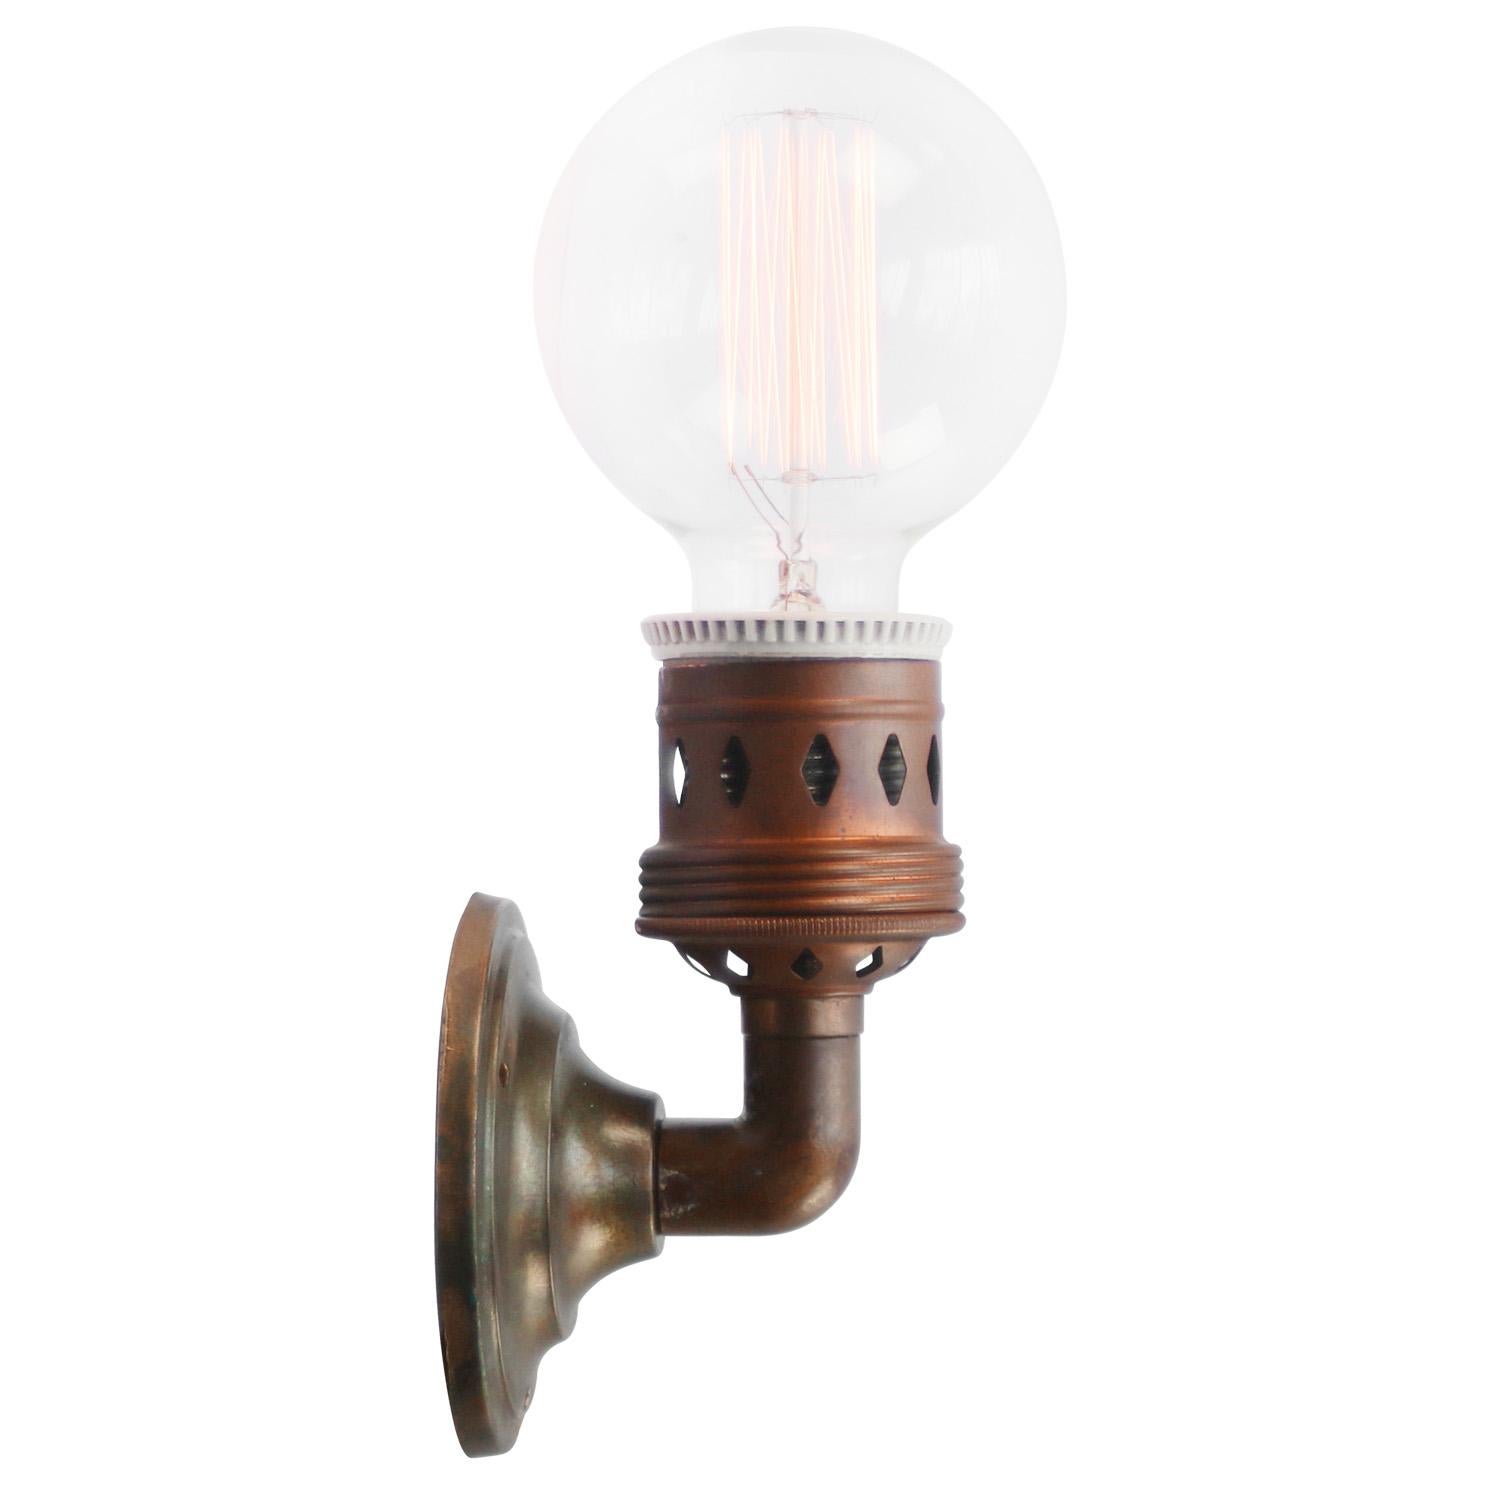 Brass scone wall Lamp
Brass wall plate, 3 holes, diameter 10 cm / 3.94”

E26 / E27

Weight: 0.75 kg / 1.7 lb

Priced per individual item. All lamps have been made suitable by international standards for incandescent light bulbs, energy-efficient and